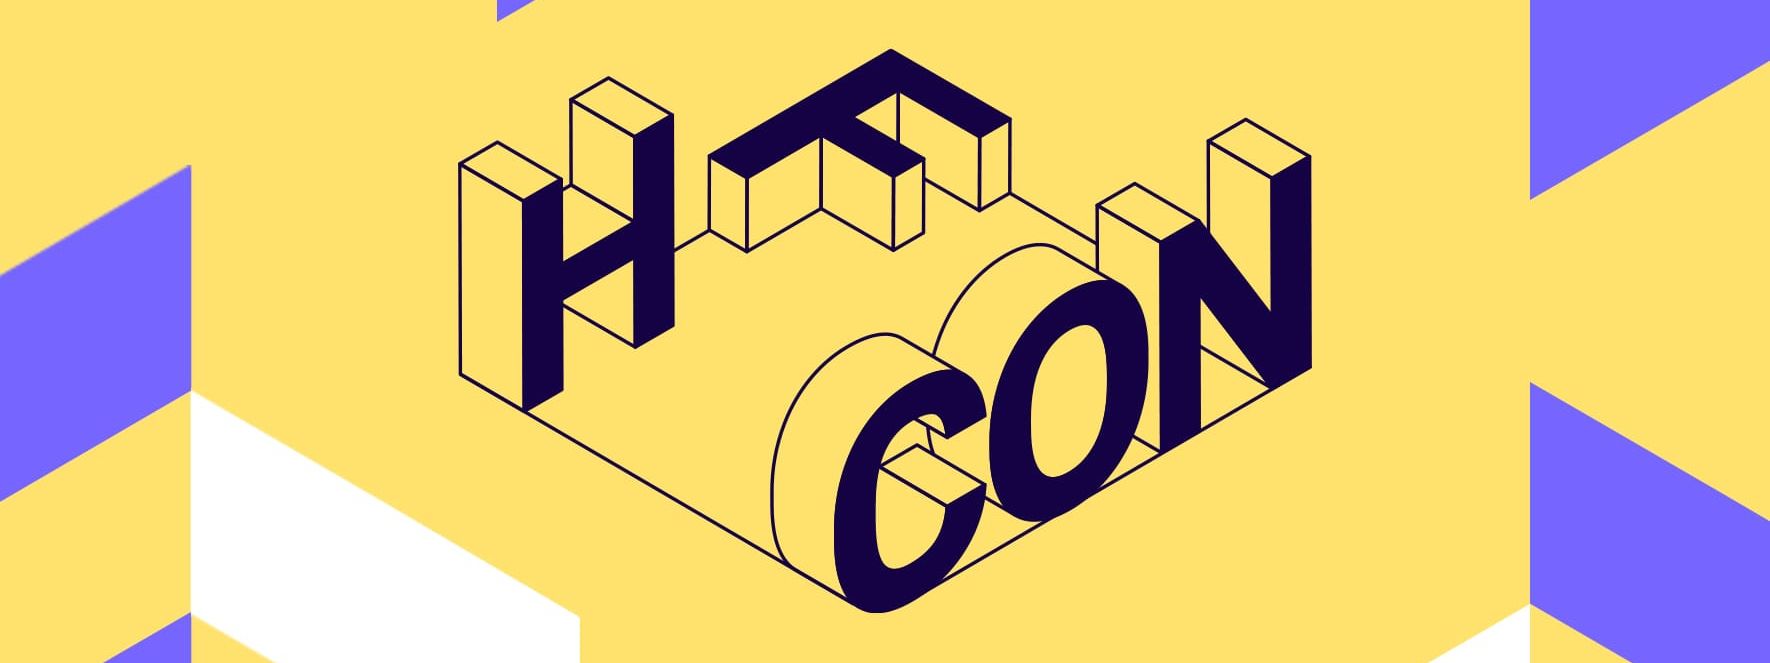 3d text saying "H F CON".The "F" is lying down.There is a pale yellow background with mauve & white shapes at the borders.